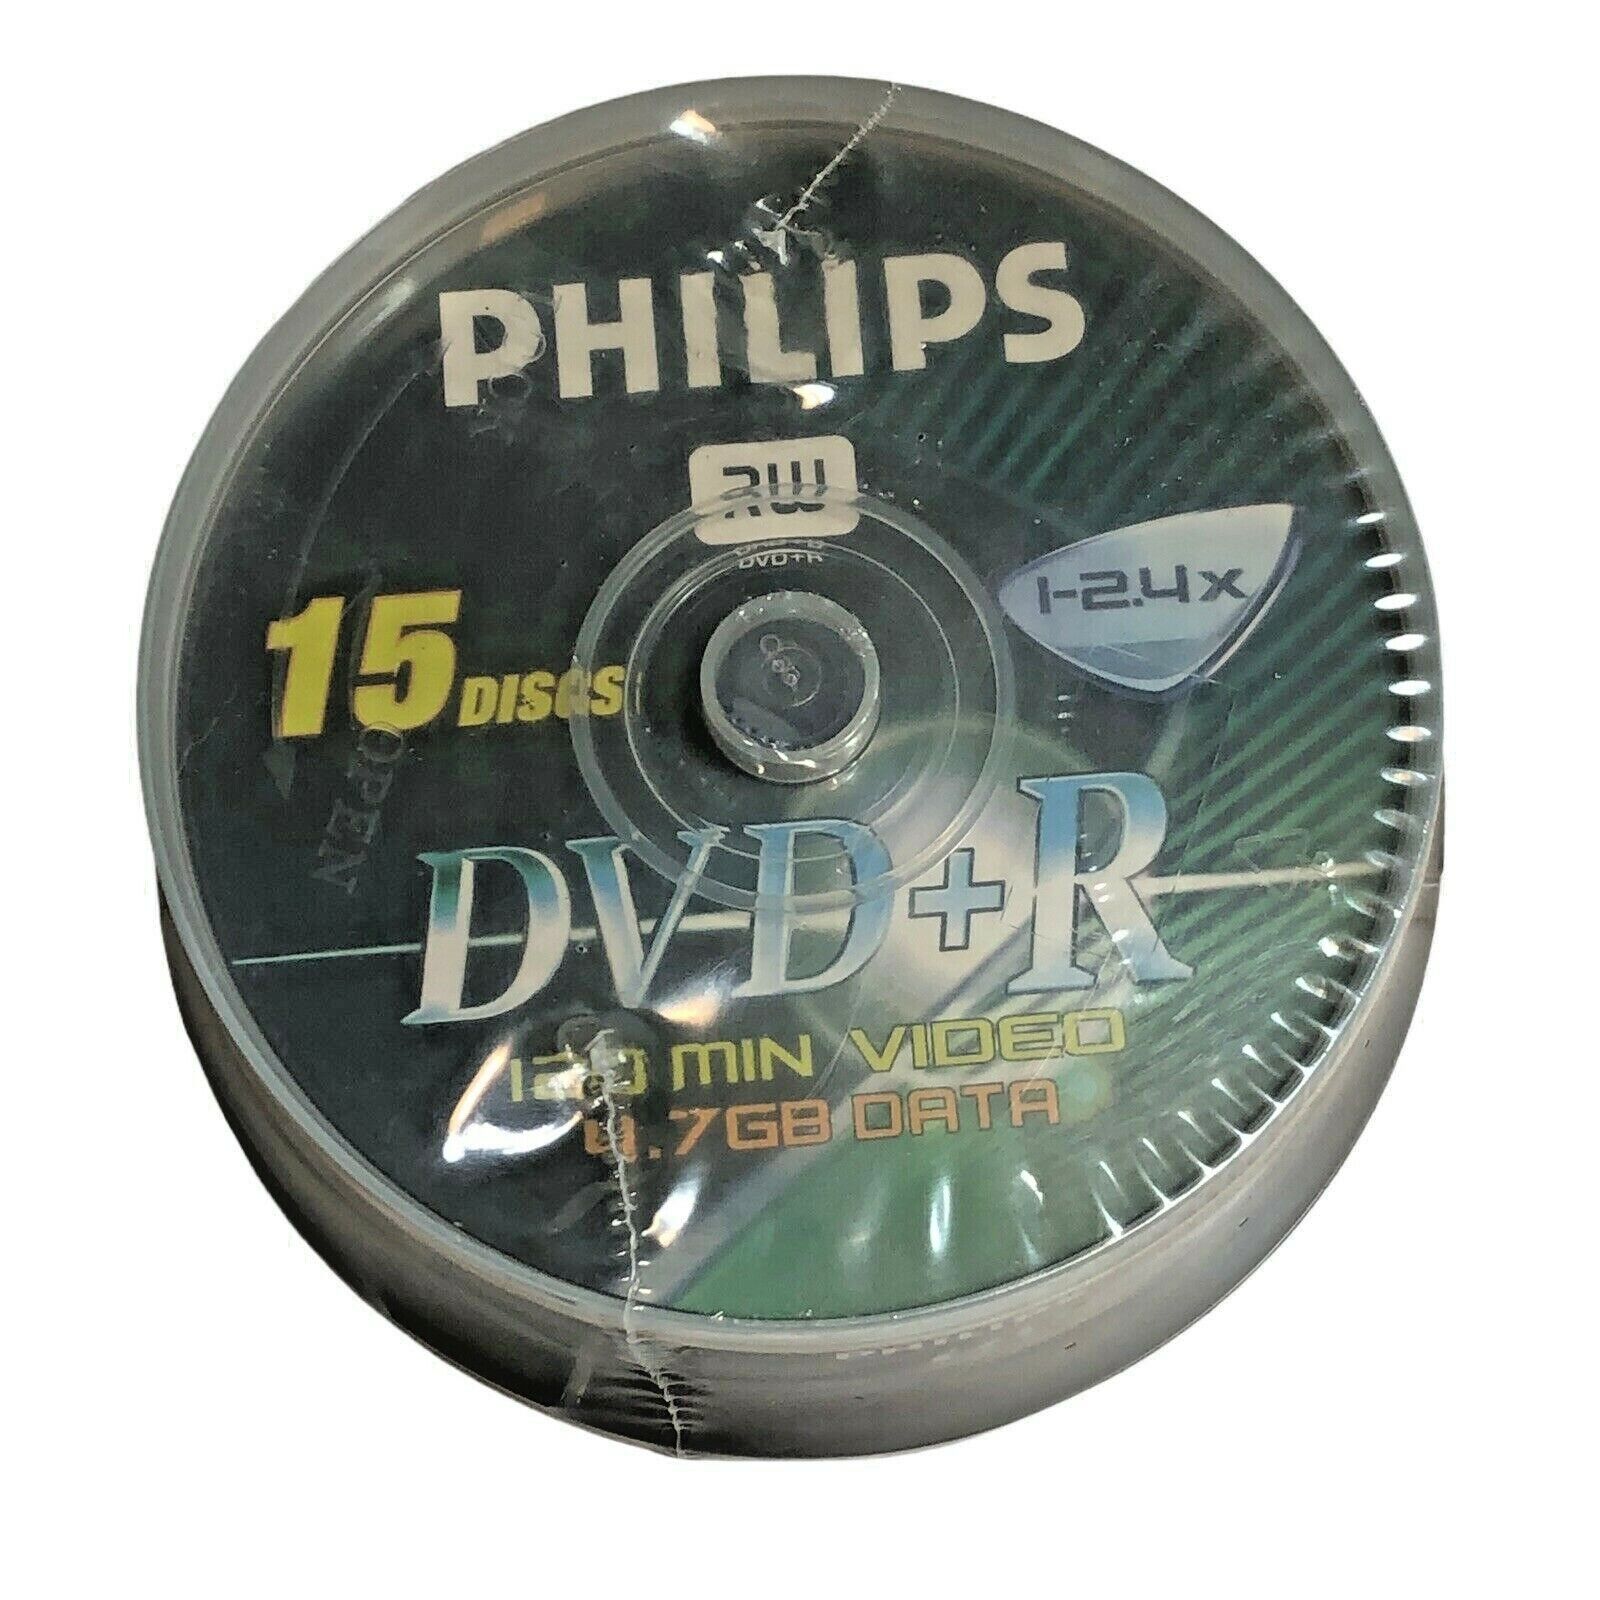 Philips DVDR1S04/711 4.7GB 120-Minute 2.4x DVD+Rs 15 ct., Cake Box Spindle NEW